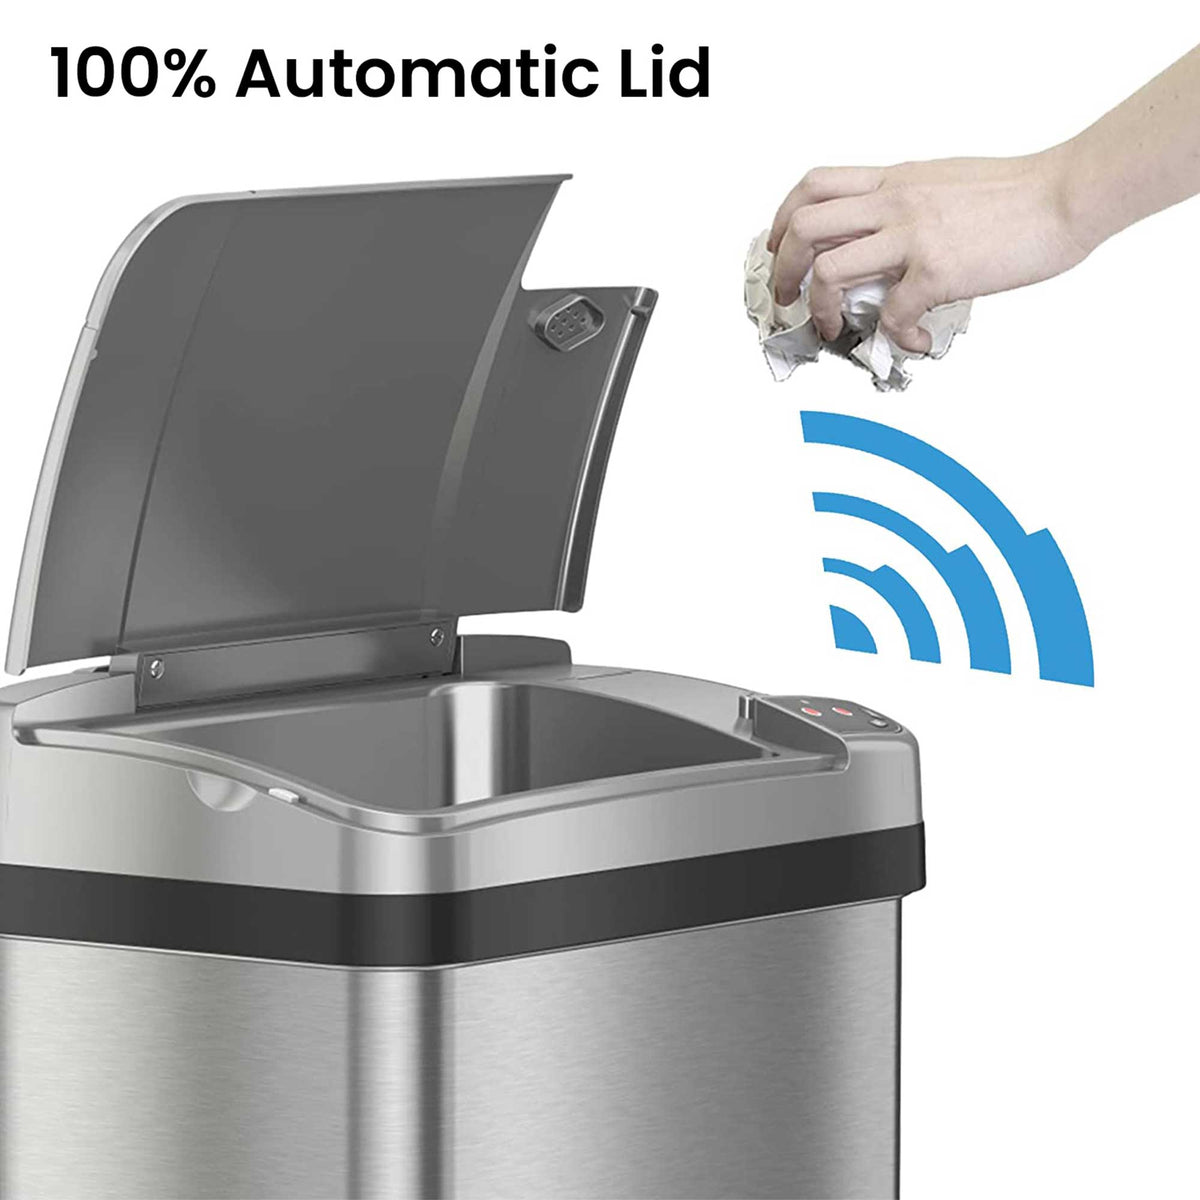 2.5 Gallon / 9.5 Liter Stainless Steel Sensor Bathroom Trash Can (2-Pack) 100% Automatic Lid